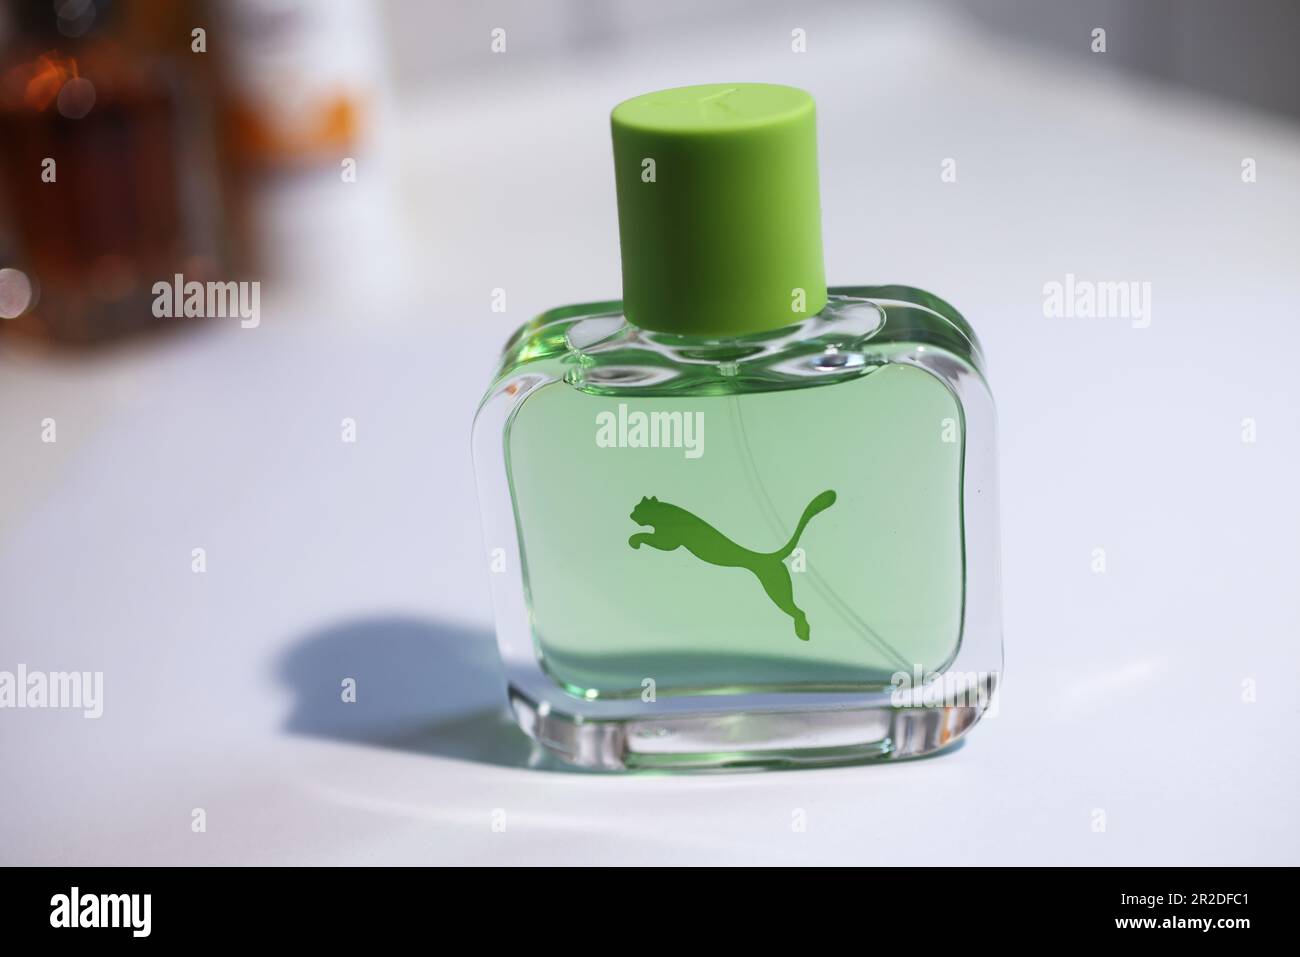 Different kinds of products in a bathroom, Puma Eau de Toilette Stock Photo  - Alamy